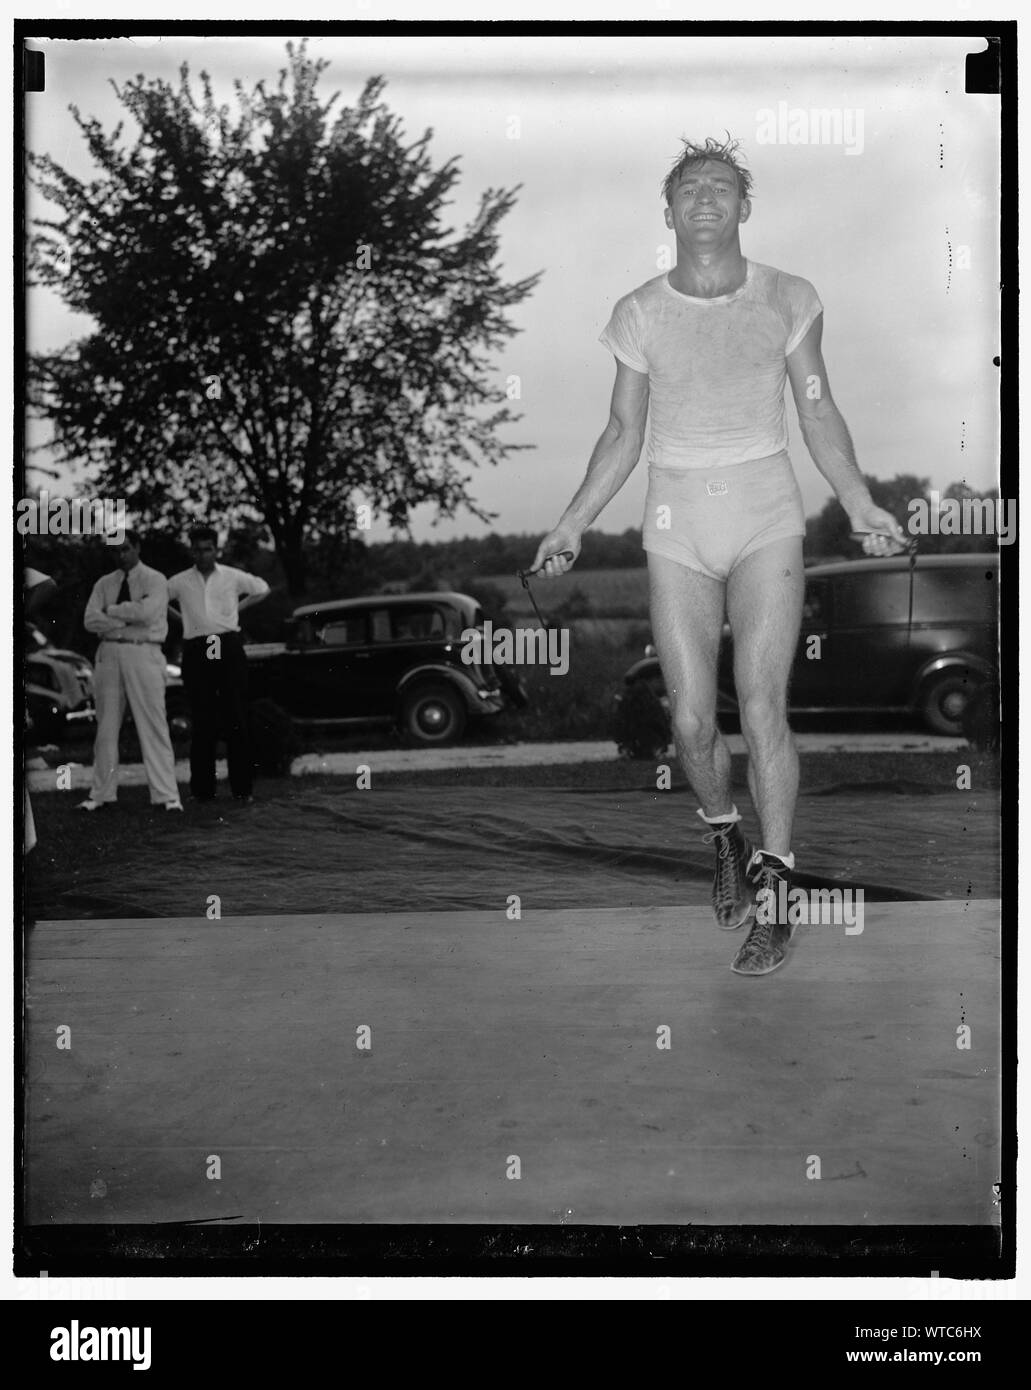 Middleweight champion expert rope skipper. Washington D.C. July 16. Rope skipping plays an important part in the training program of middleweight champion Freddied Steele, as he prepares for his coming battle on July 20 with Hobo Williams at Griffith Stadium. The championship will be at stake in the fight which is being sponsored by the Variety Club of Washington. 7/16/37 Stock Photo